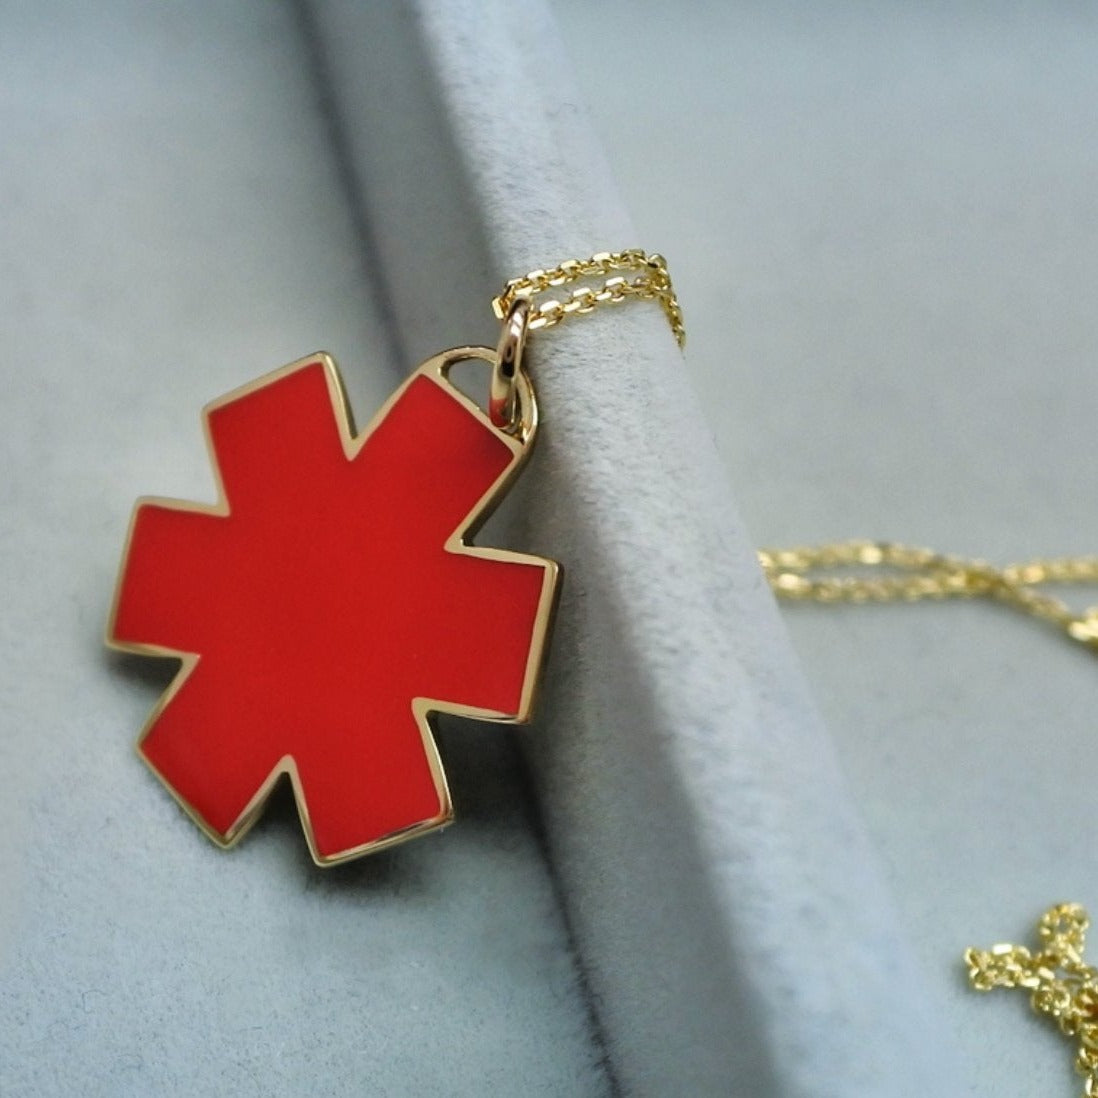 Medical ID Star of Life Charm Necklace Bracelet from Charmed Medical Jewelry - 14K Gold Red Enamel